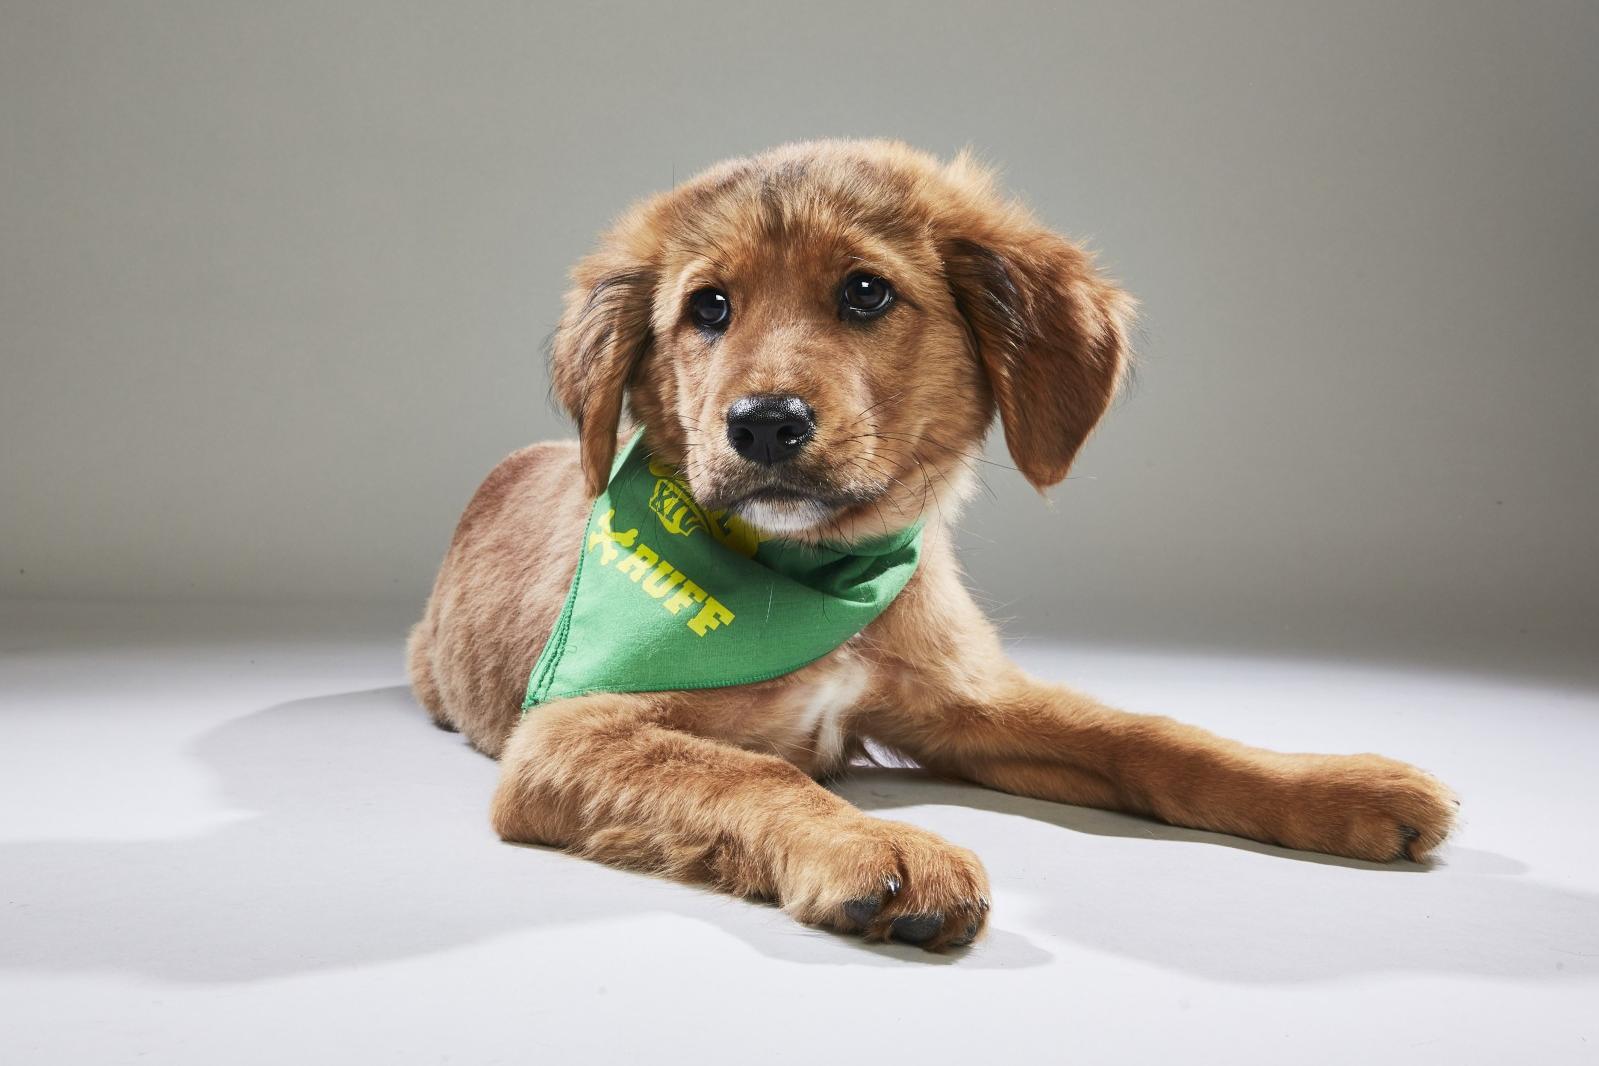 Puppy Bowl XIV will feature special puppy guests rescued after Hurricane Maria (Animal Planet)